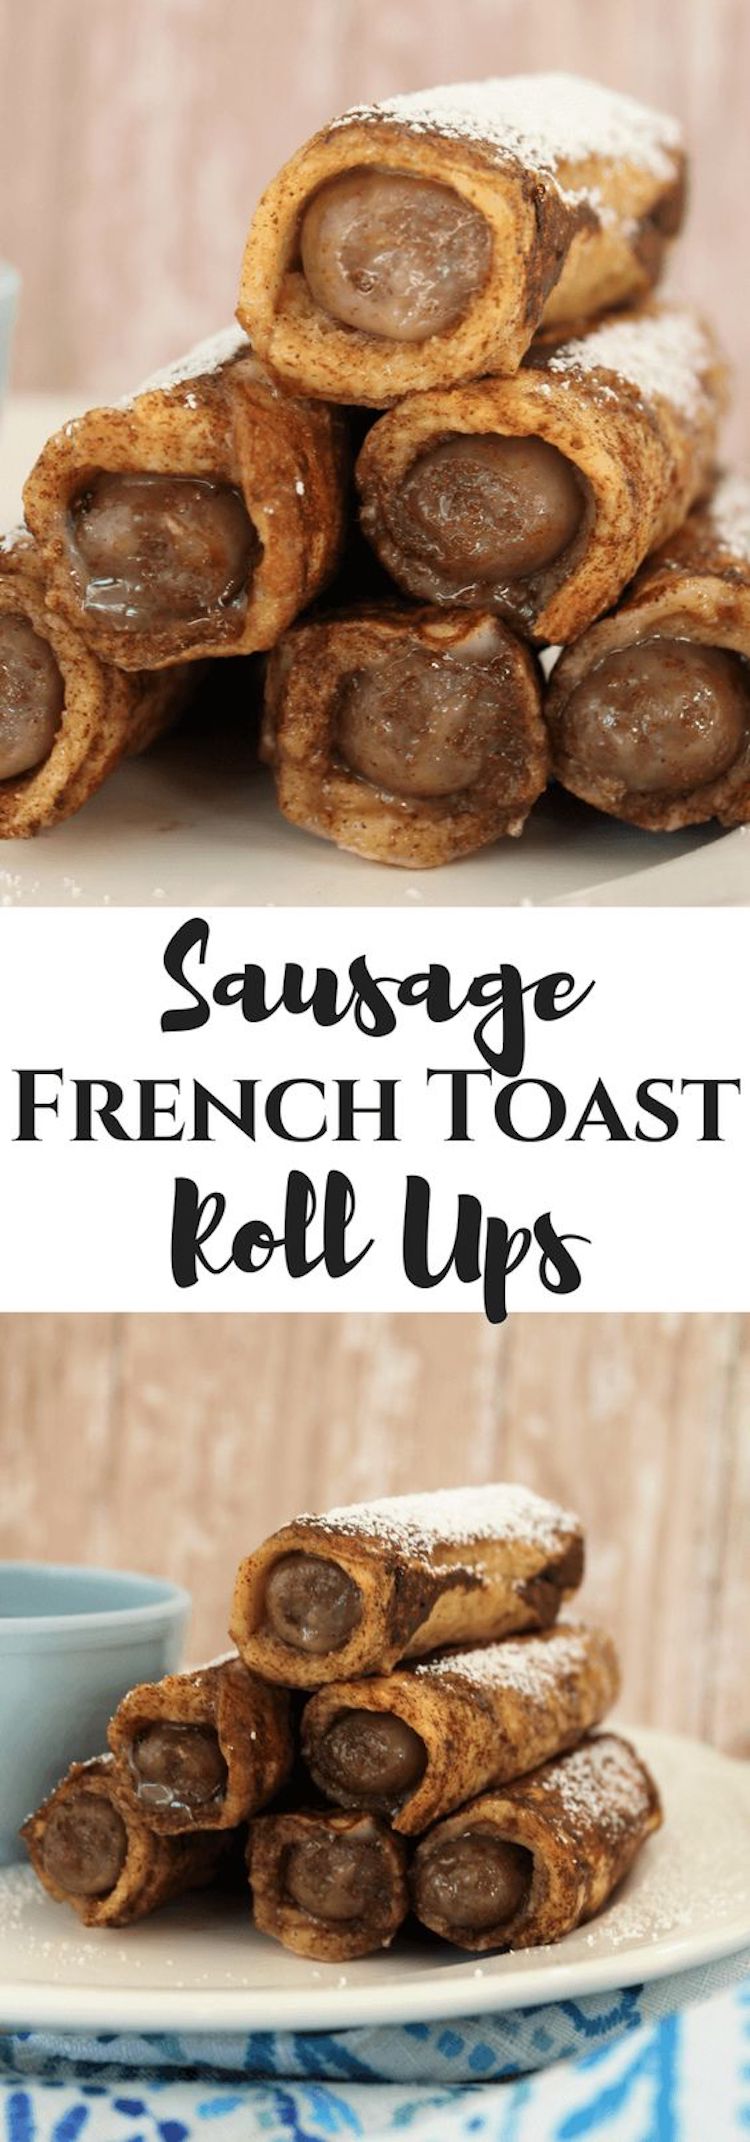 Sausage + French Toast Roll-Ups Recipe